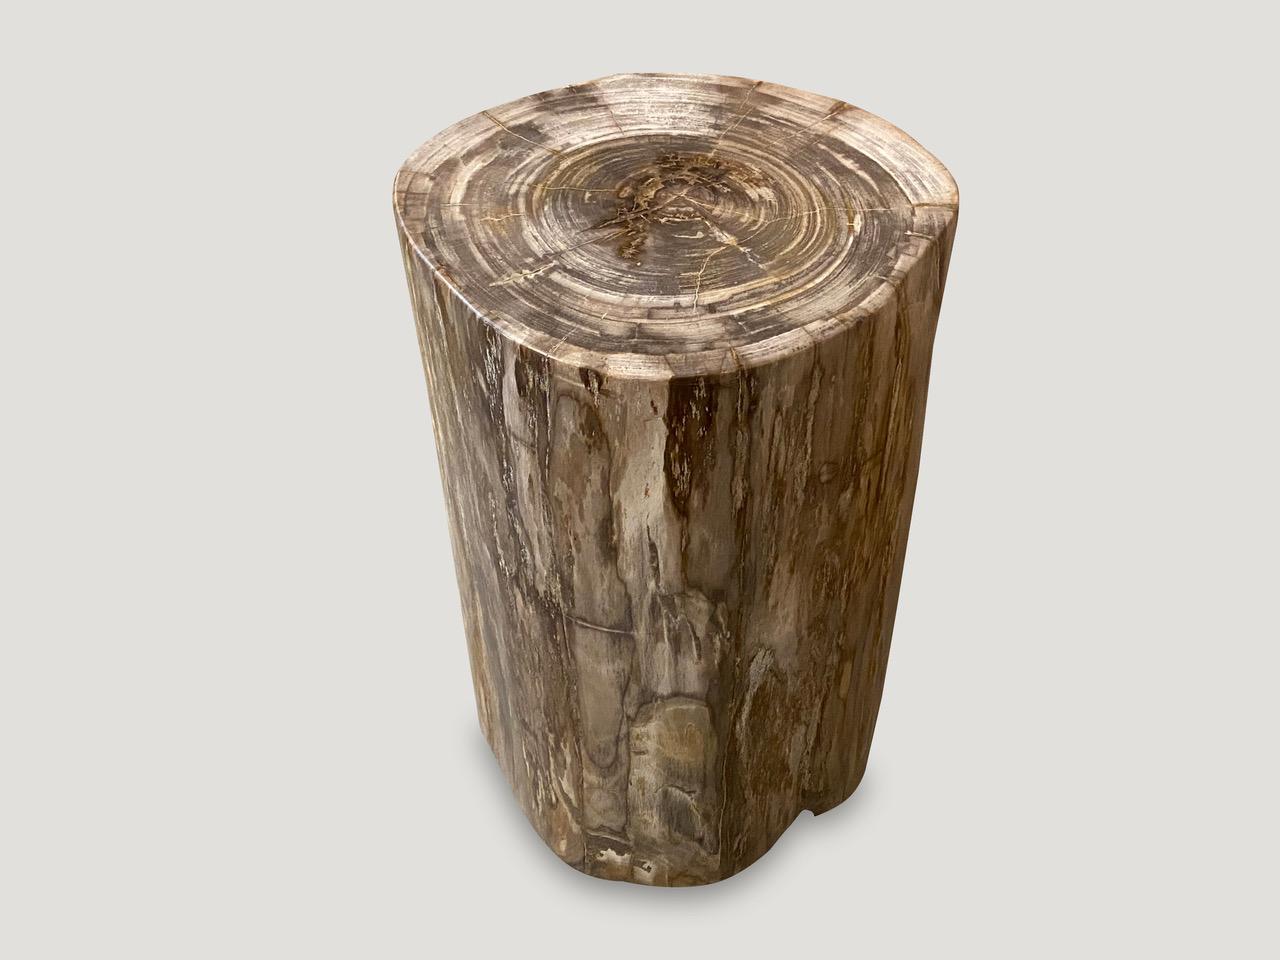 High quality petrified wood side table. It’s fascinating how Mother Nature produces these exquisite 40 million year old petrified teak logs with such contrasting colors and natural patterns throughout. Modern yet with so much history.

As with a